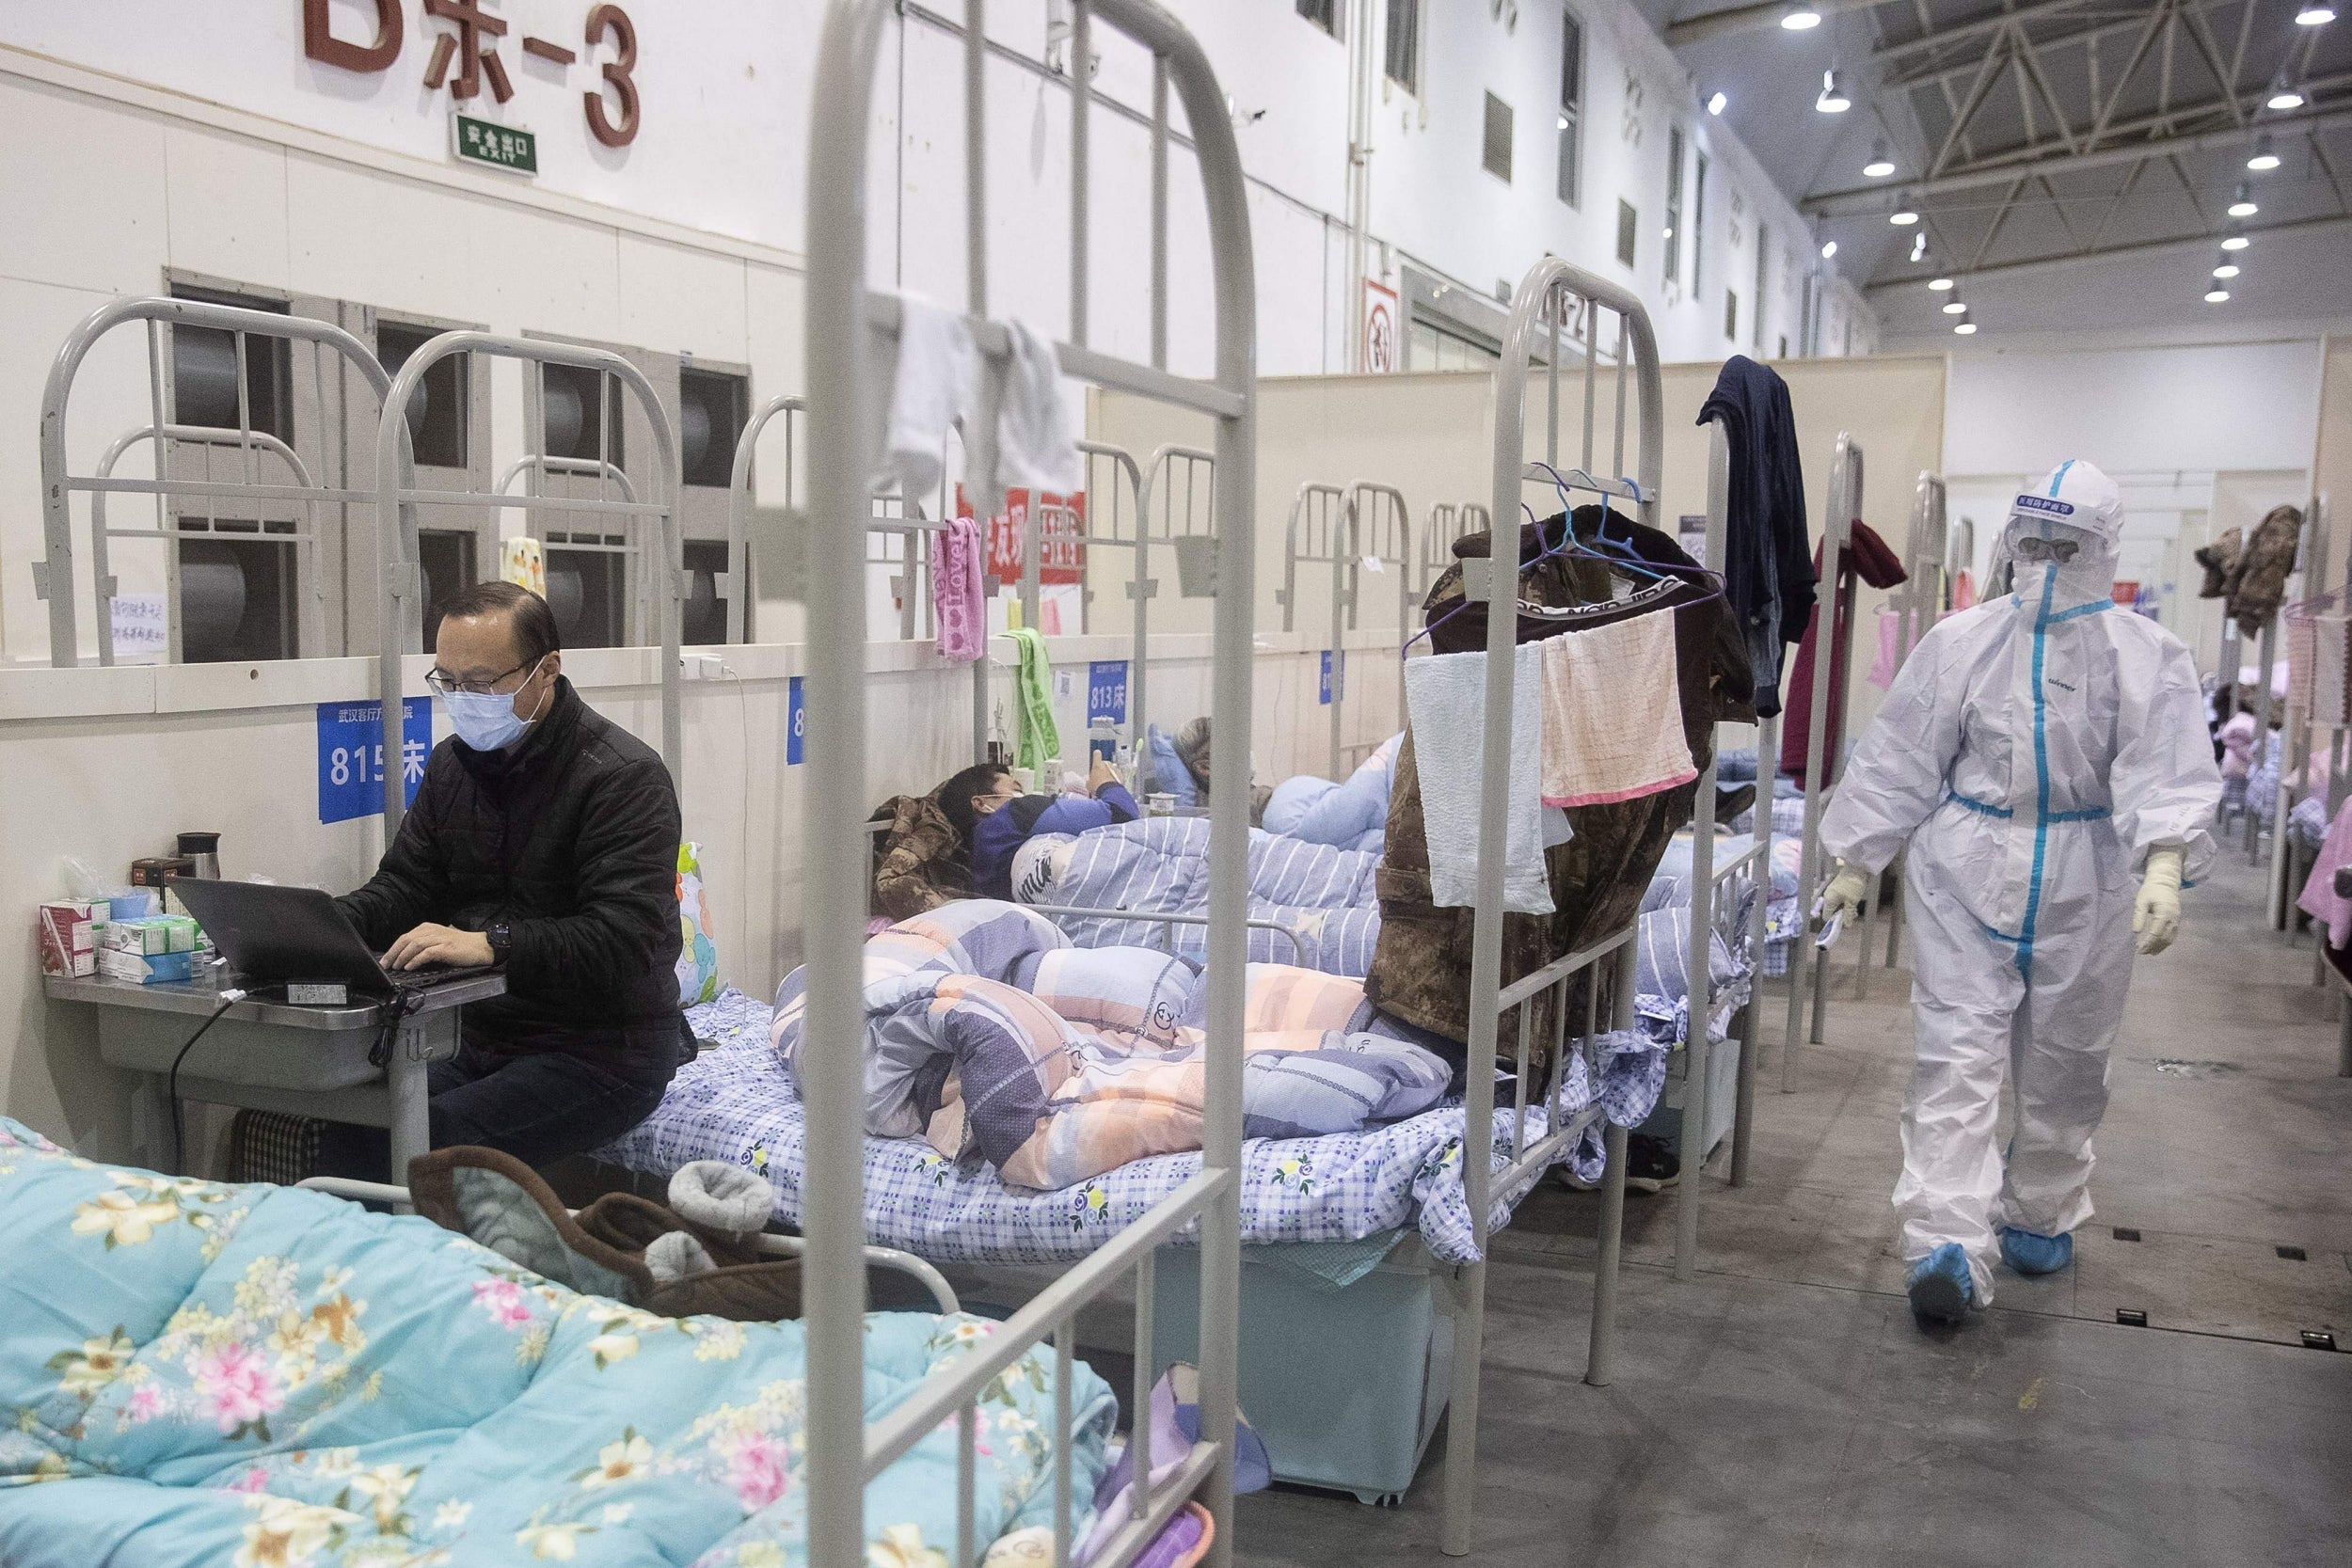 Coronavirus patients receive treatment at a hospital in Hubei province